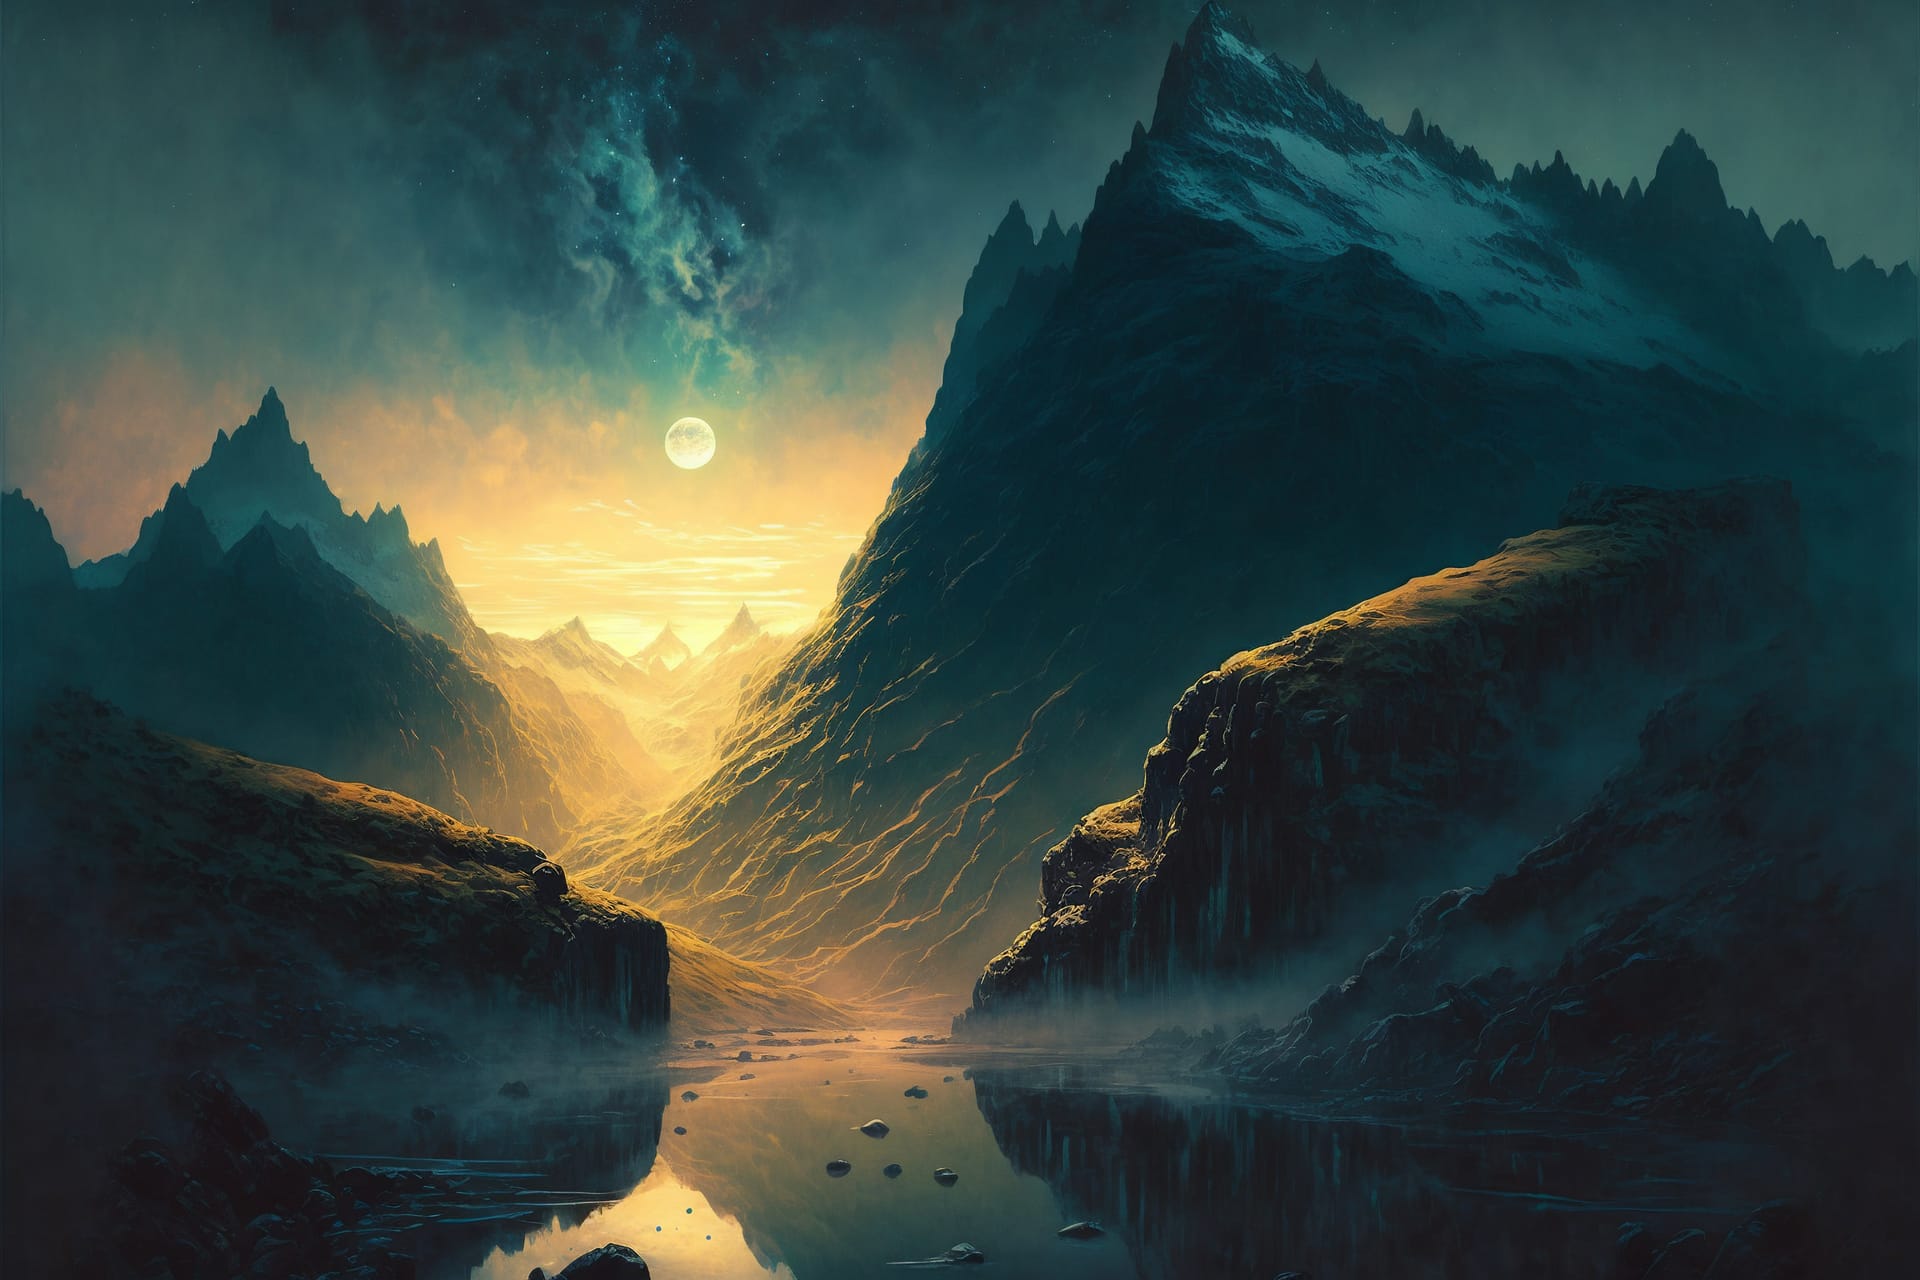 Mountain valley with river beautiful evening creative digital painting illustration